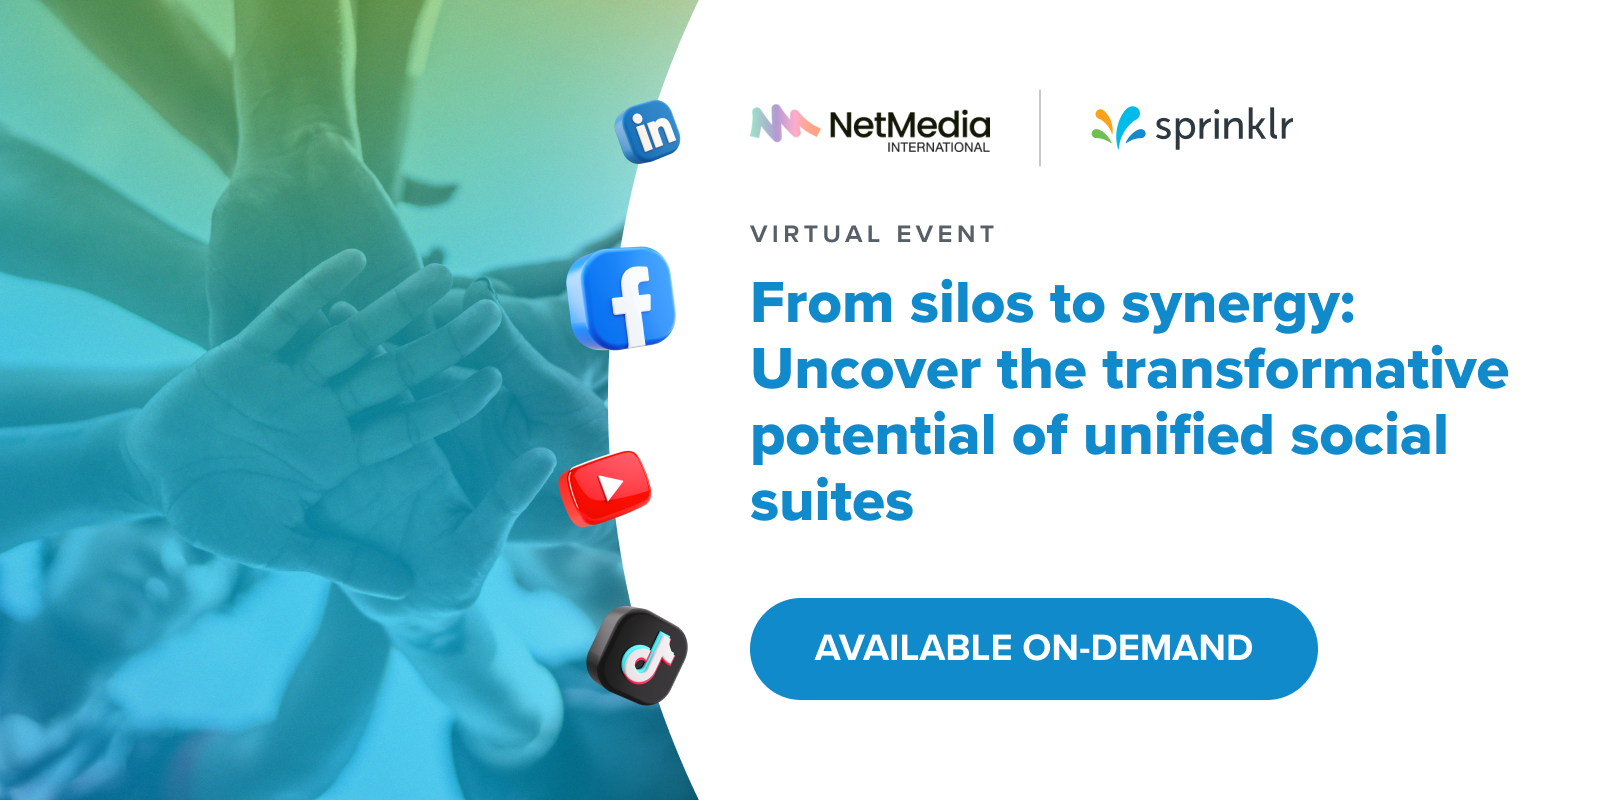 From silos to synergy: Uncover the transformative potential of unified social suites